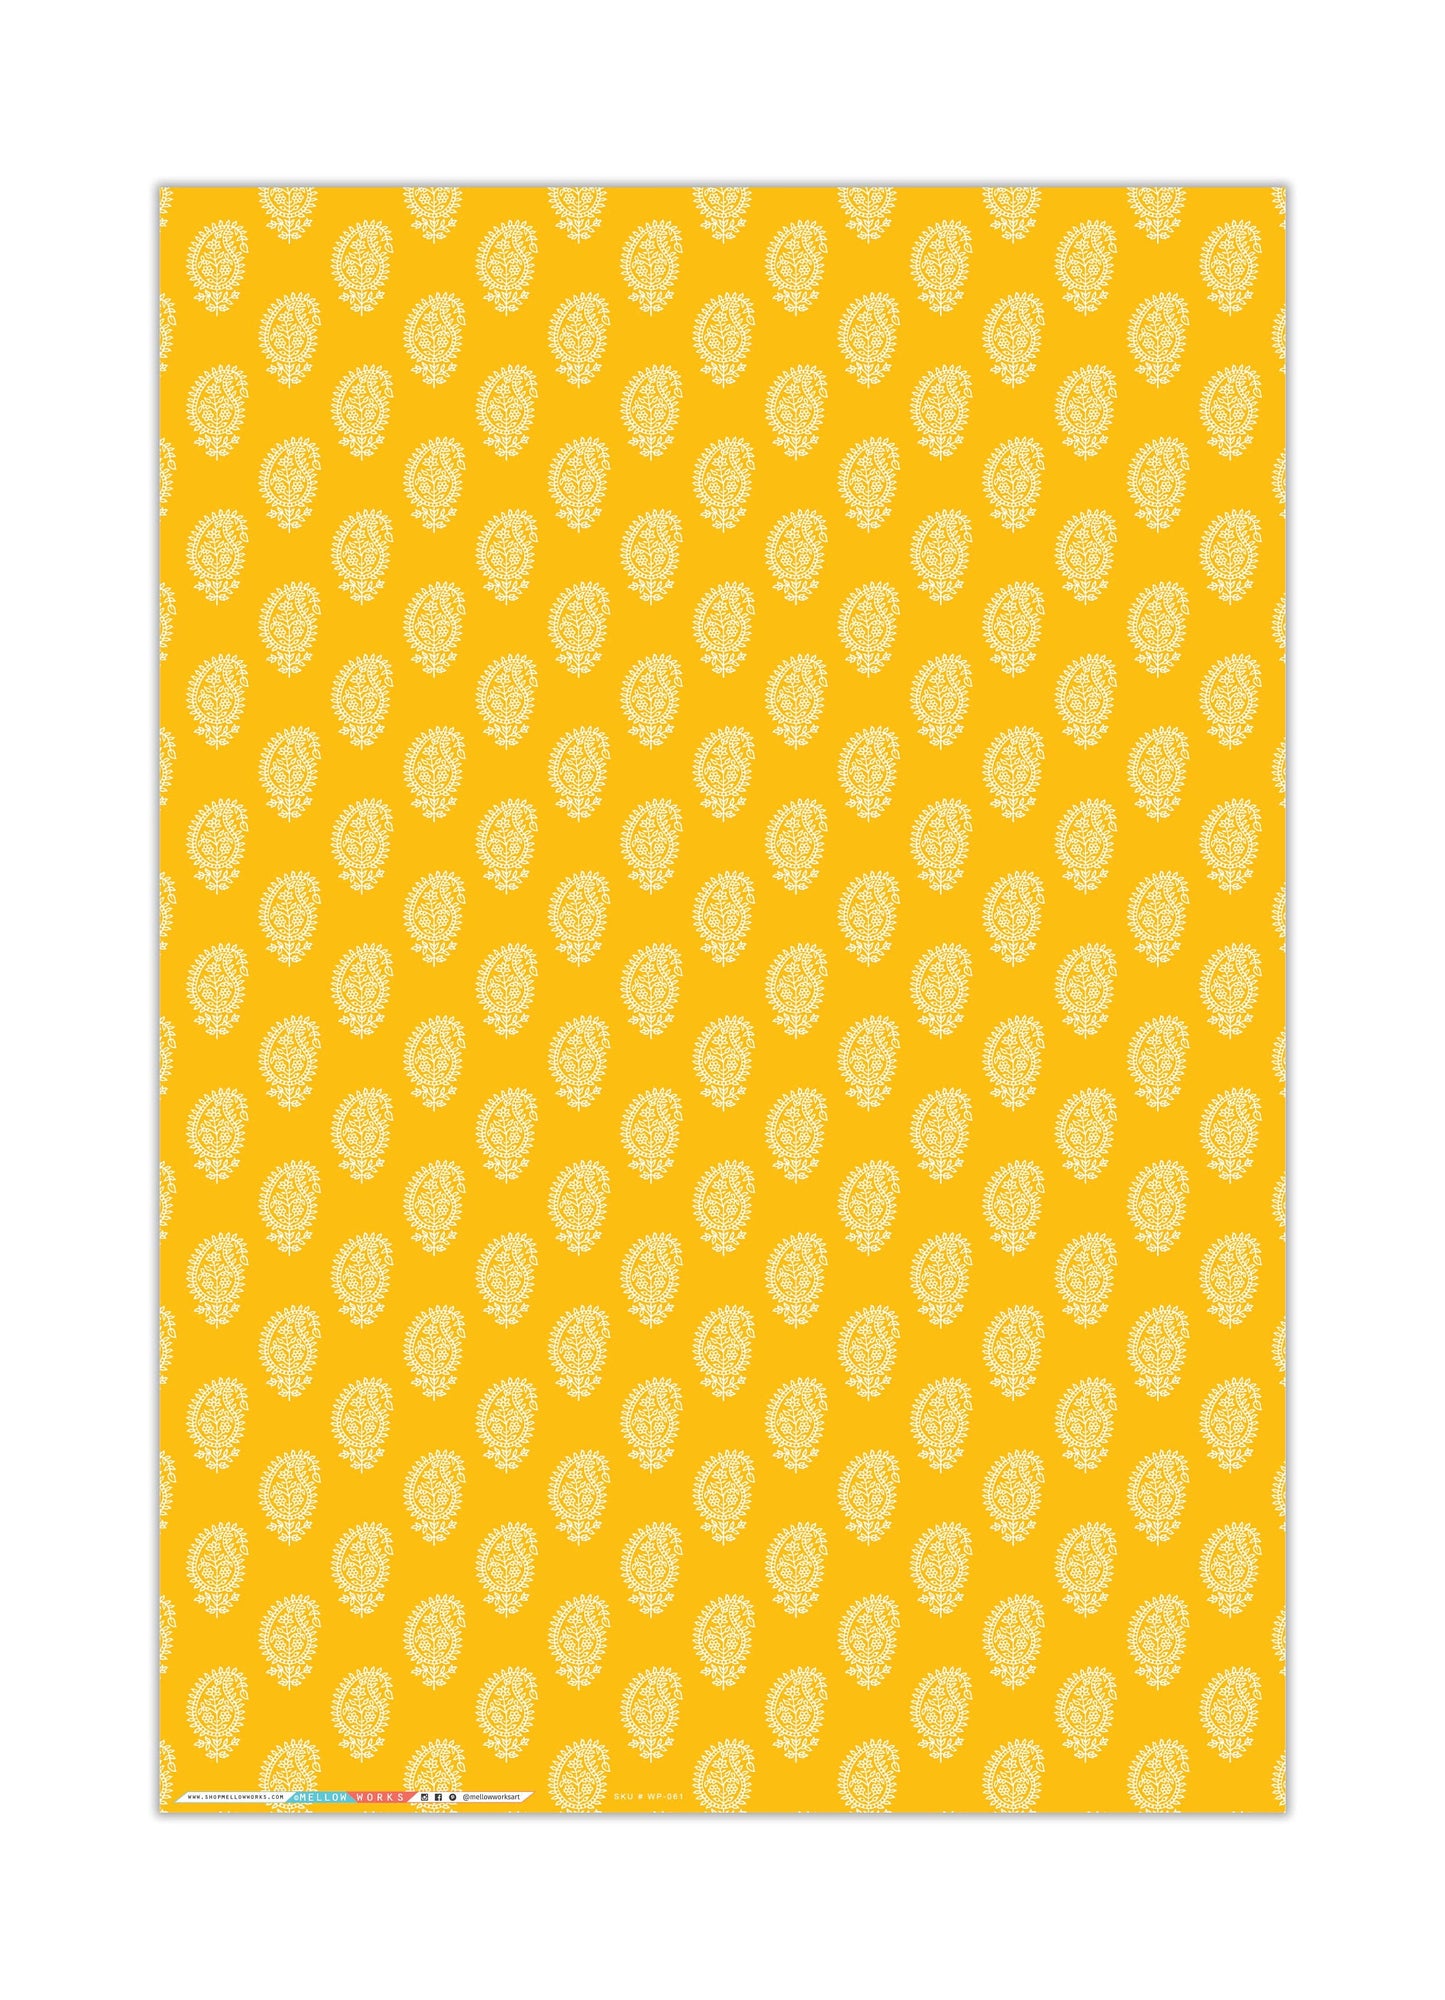 FESTIVE YELLOW PAISLEY WRAPPING PAPER